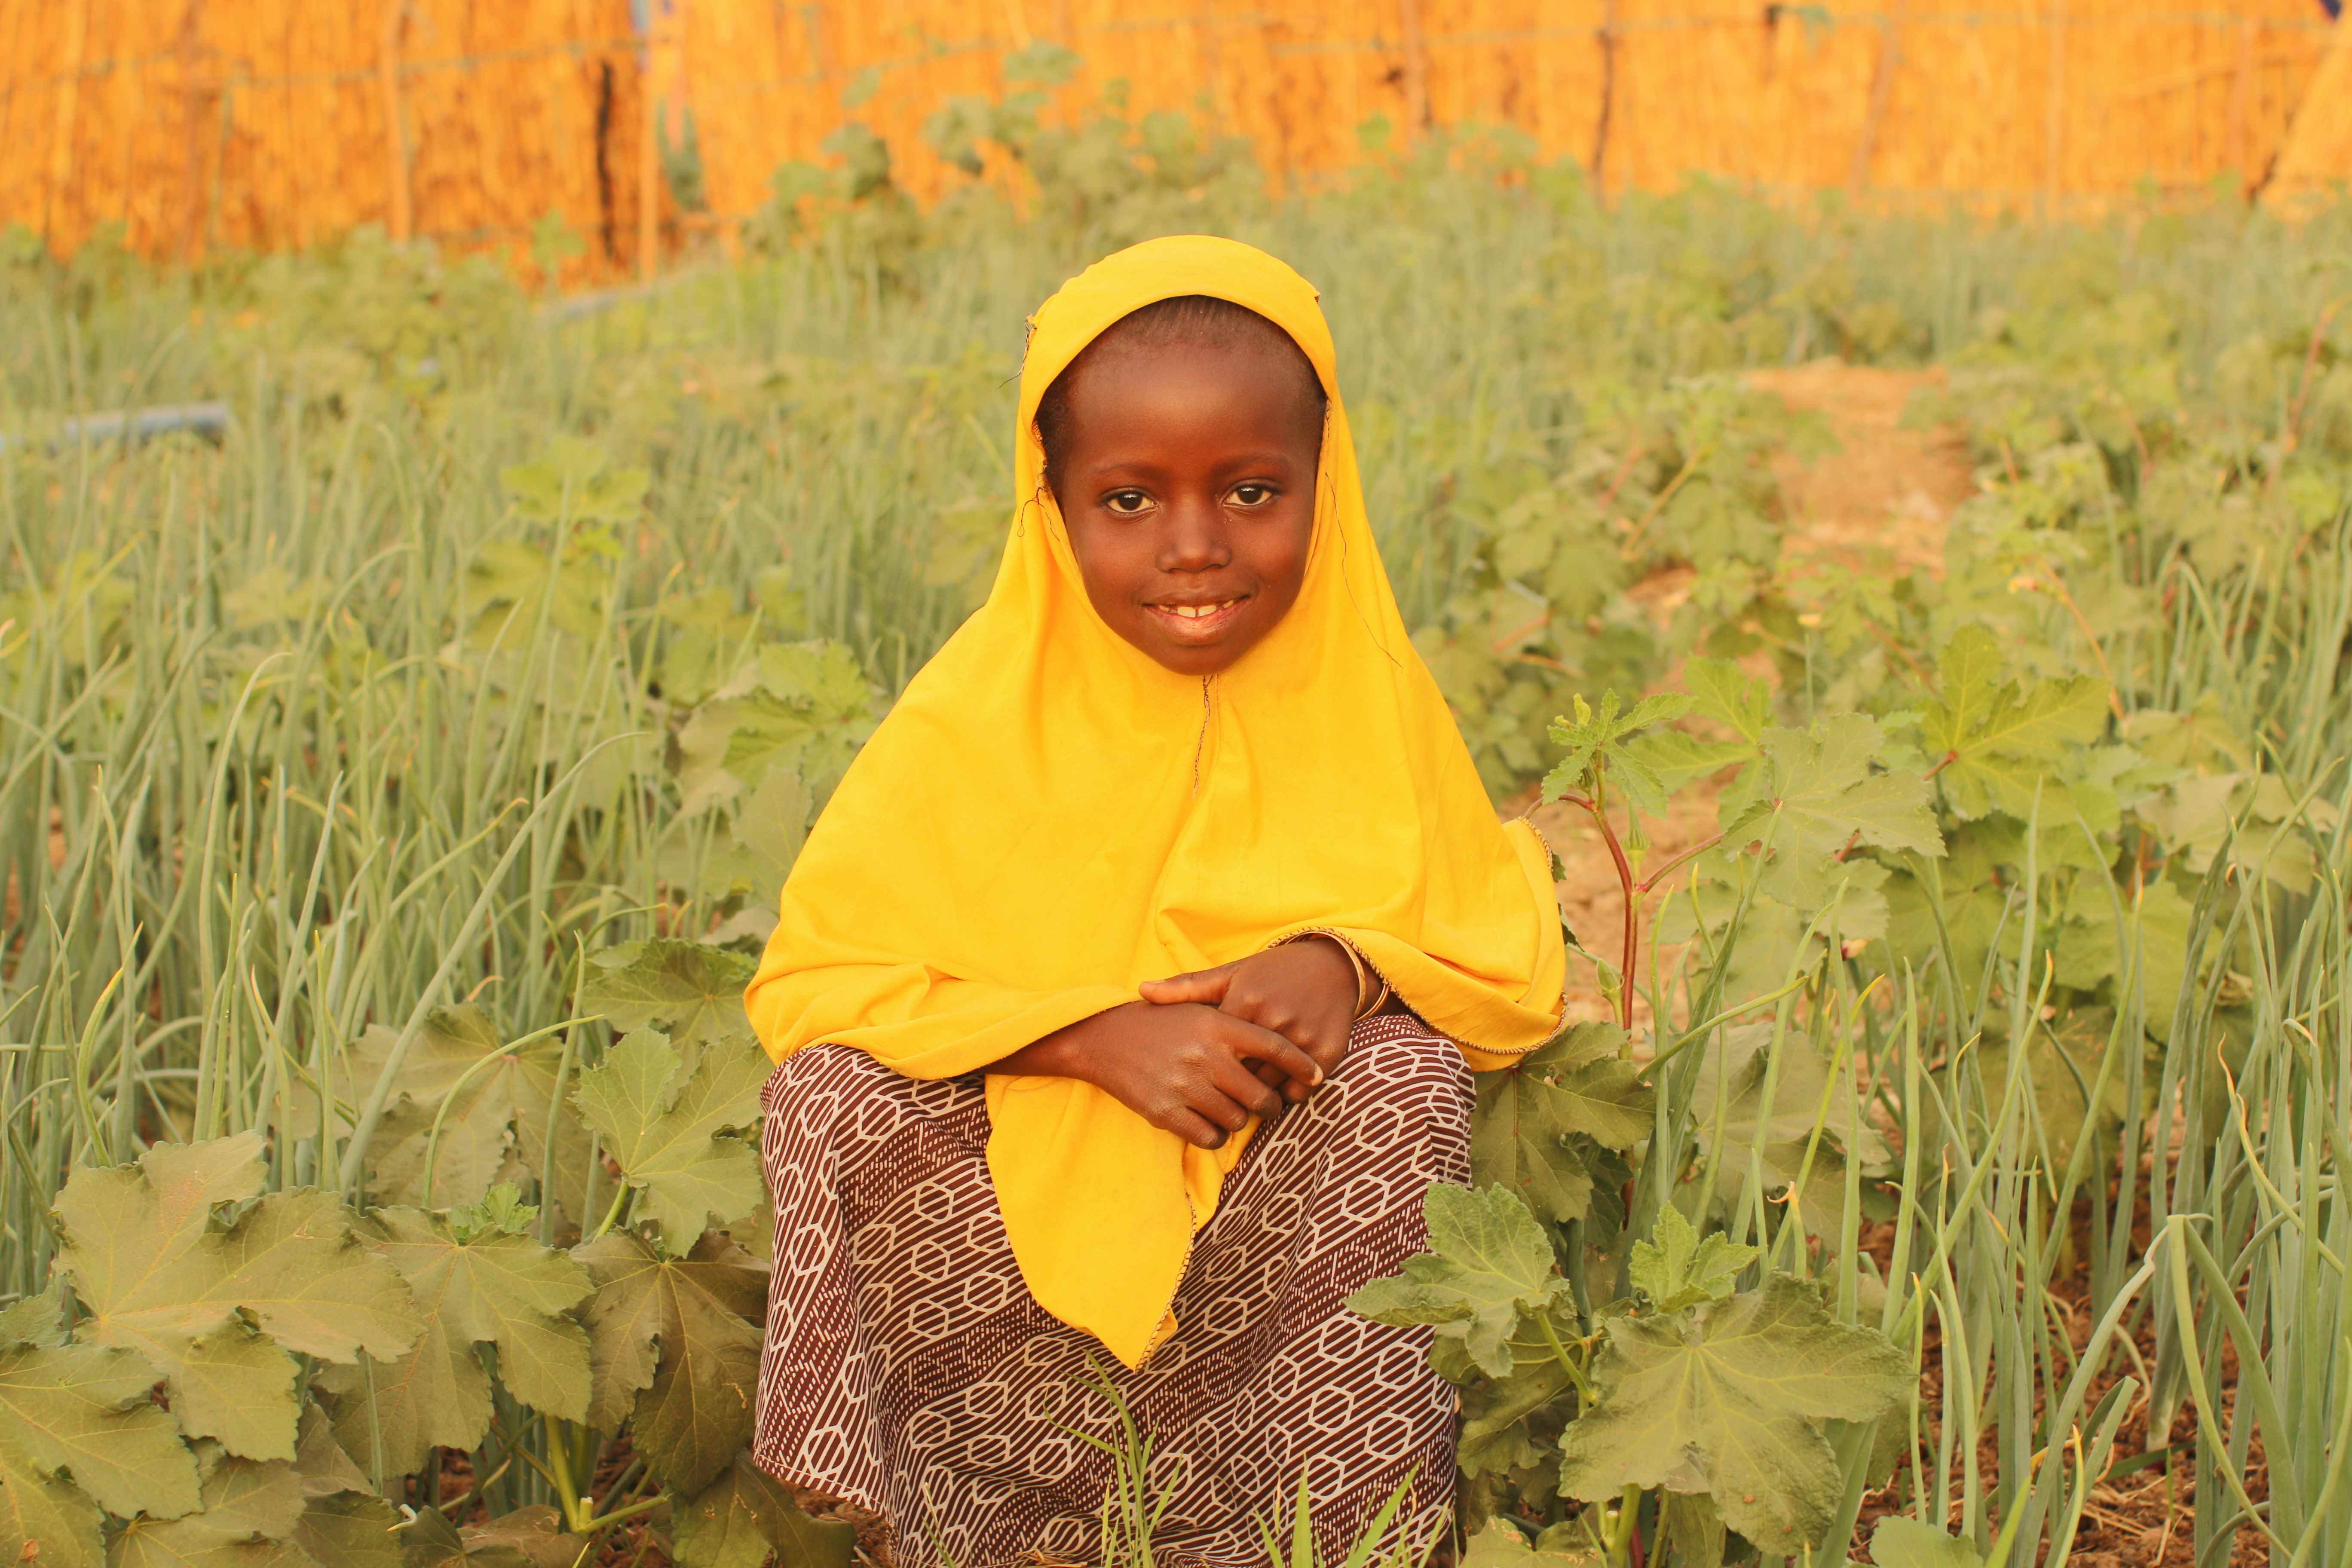 Child from Niger stands in a field of cauliflower, wearing a vibrant yellow headdress